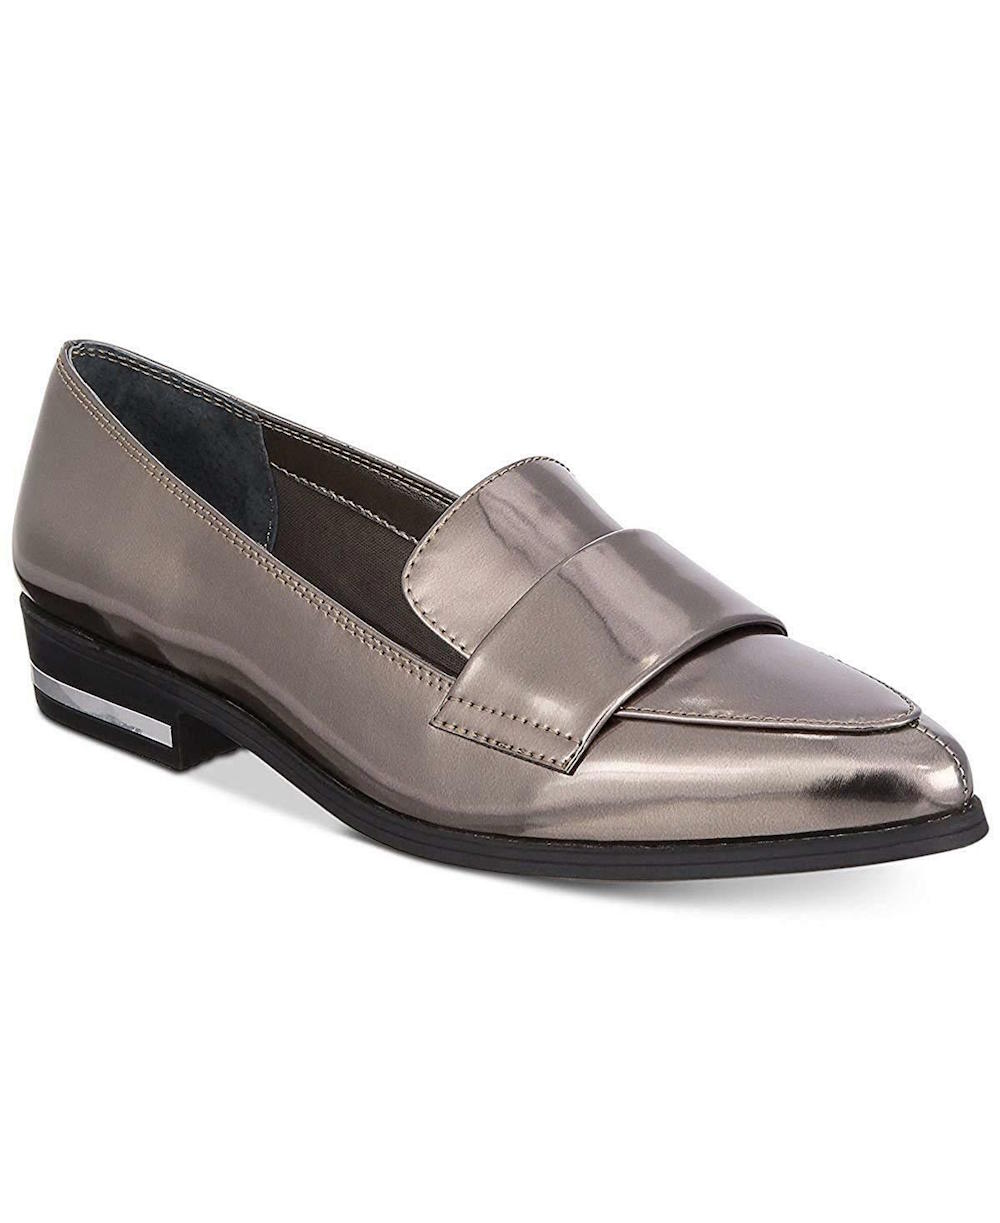 Bar III Women's Shoes Involve2 Pointed Toe Loafers, Pewter, Size 6.0 ...